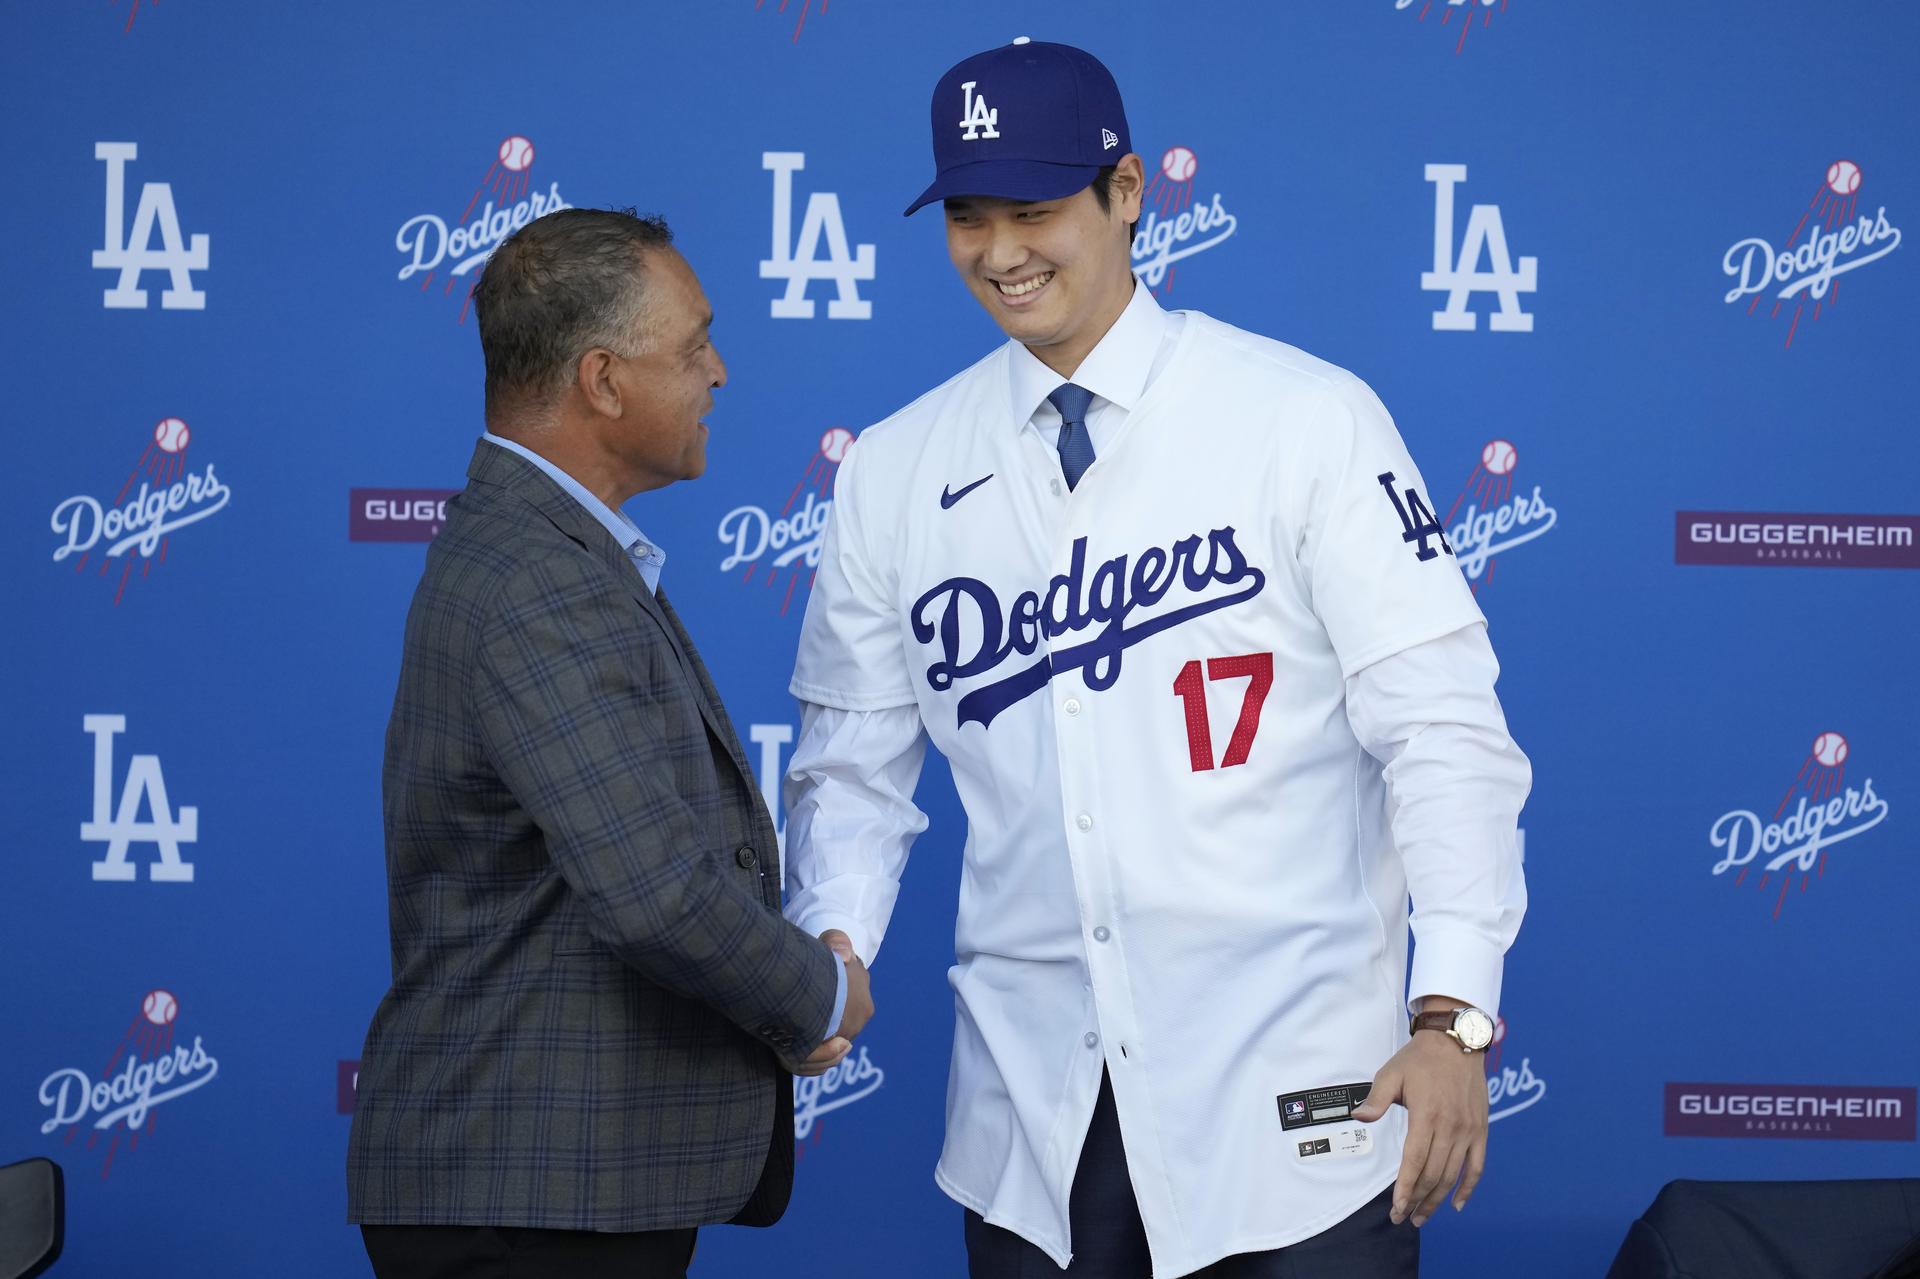 Shohei Ohtani shaking hands with Dave Roberts